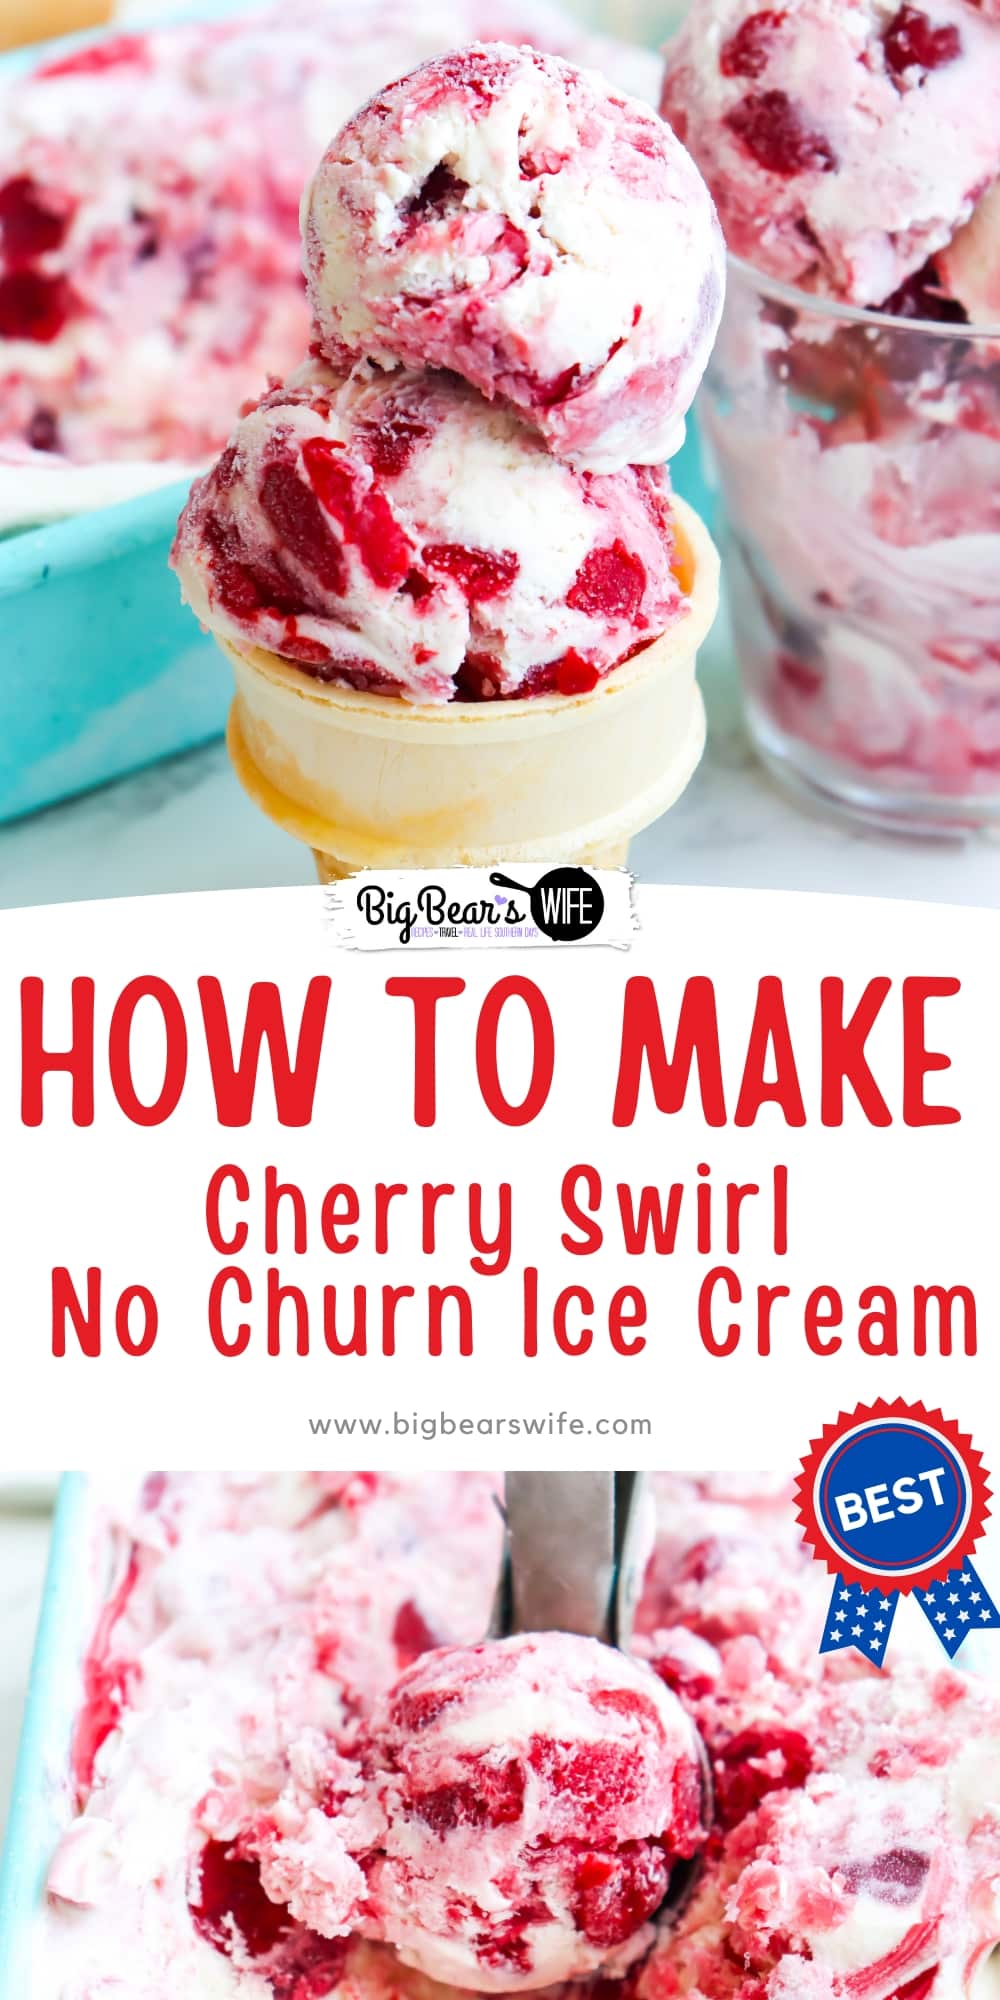 Escape the summer heat with a homemade no churn cherry swirl ice cream that is guaranteed to cool you down and delight your taste buds. Let me show you how to create this refreshing and creamy treat right in your own kitchen! Plus you don't need an ice cream maker to make this! Say hello to the ultimate summer dessert! via @bigbearswife